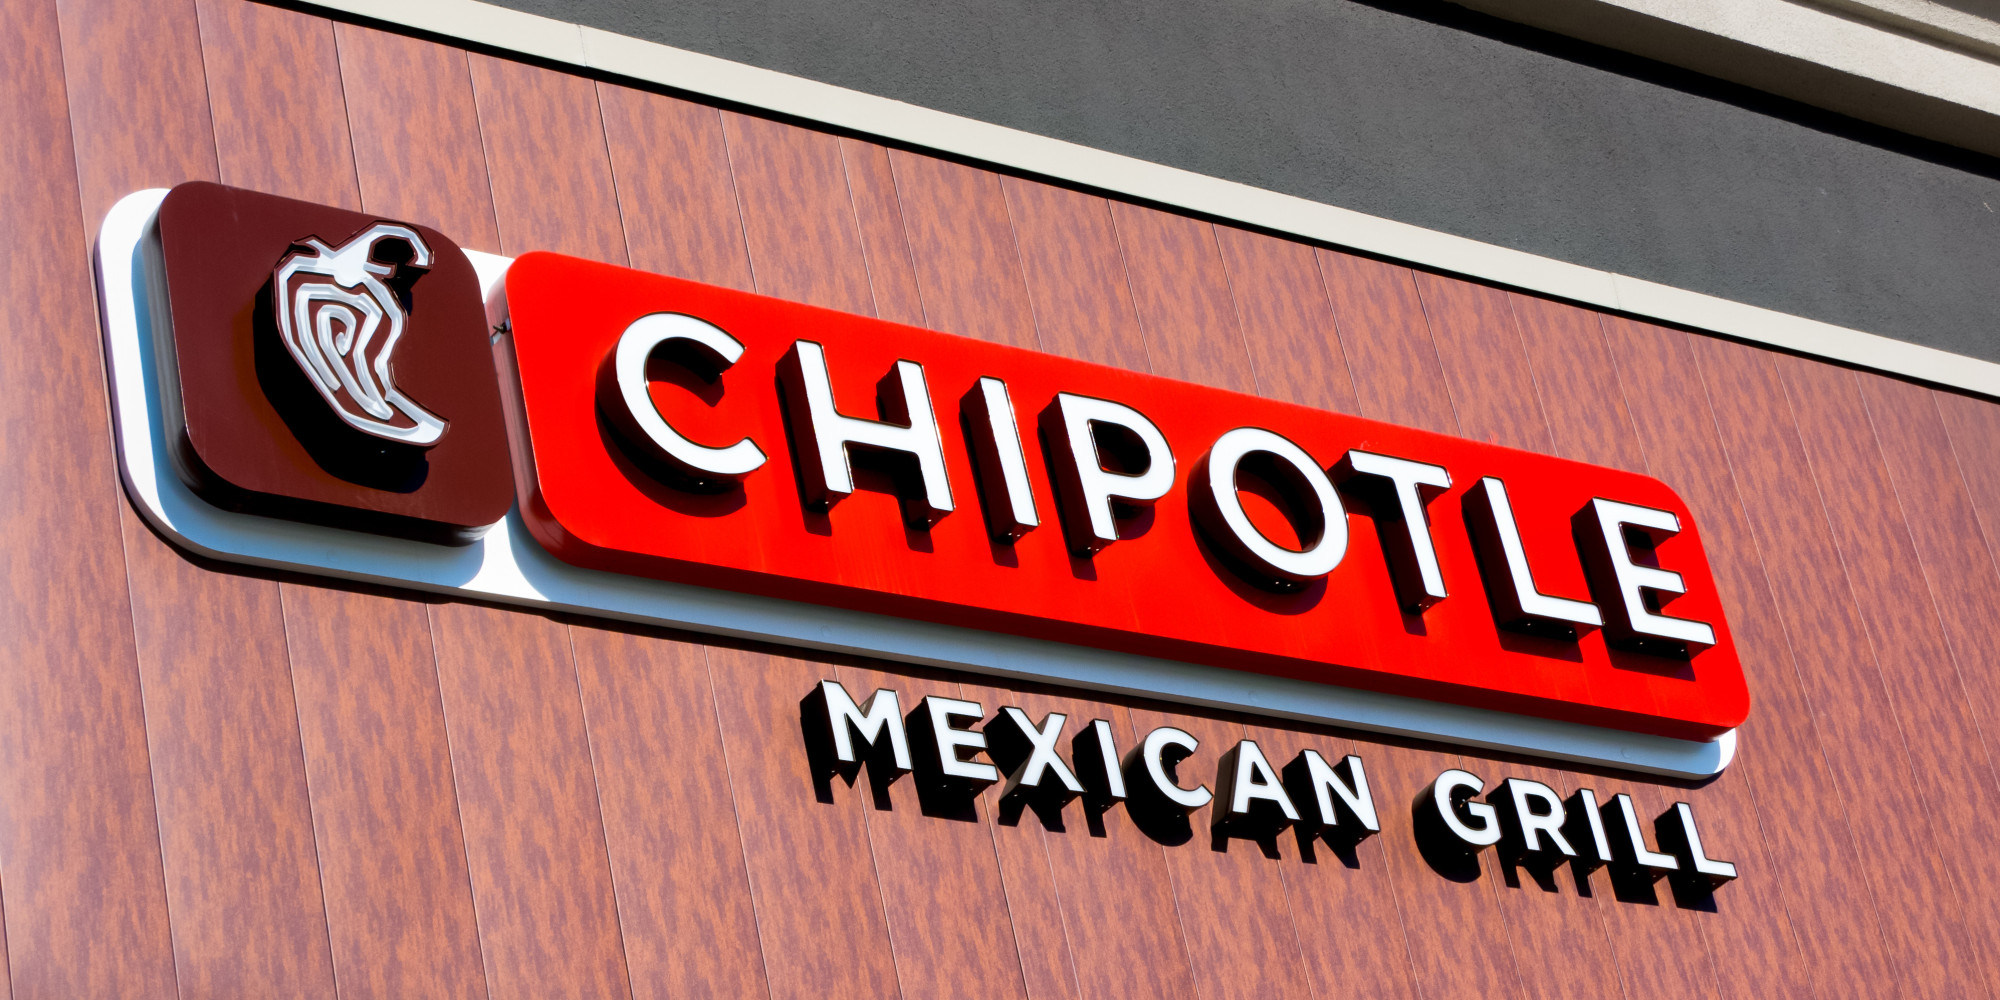 Chipotle Hack Has Customers Concerned